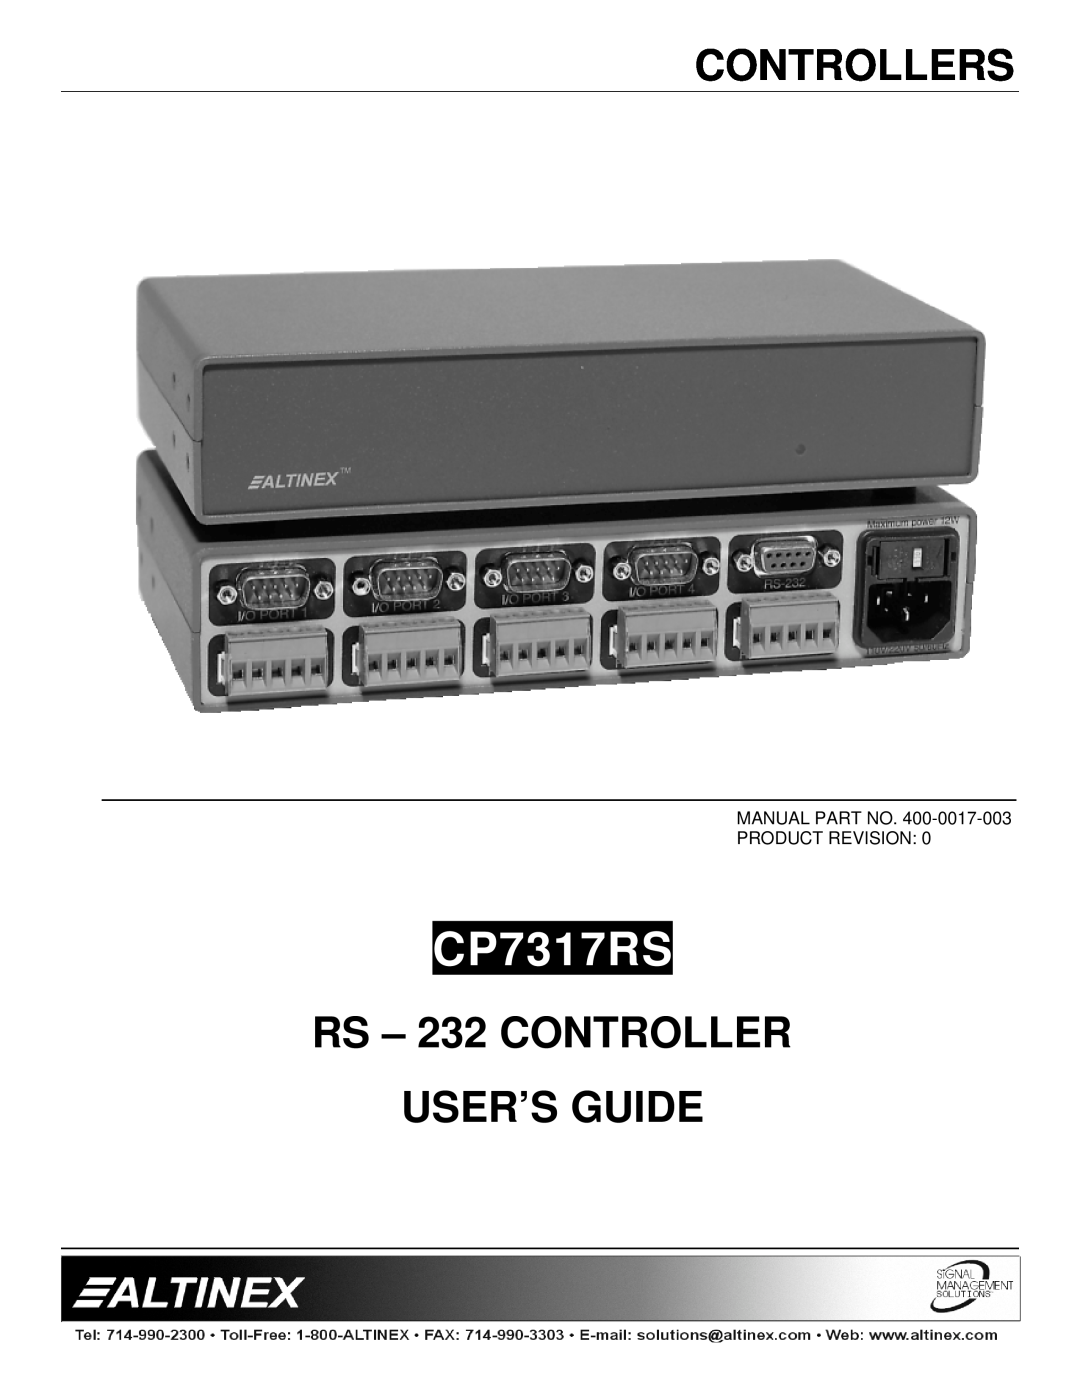 Altinex CP7317RS manual Controllers, RS - 232 CONTROLLER USER’S GUIDE 